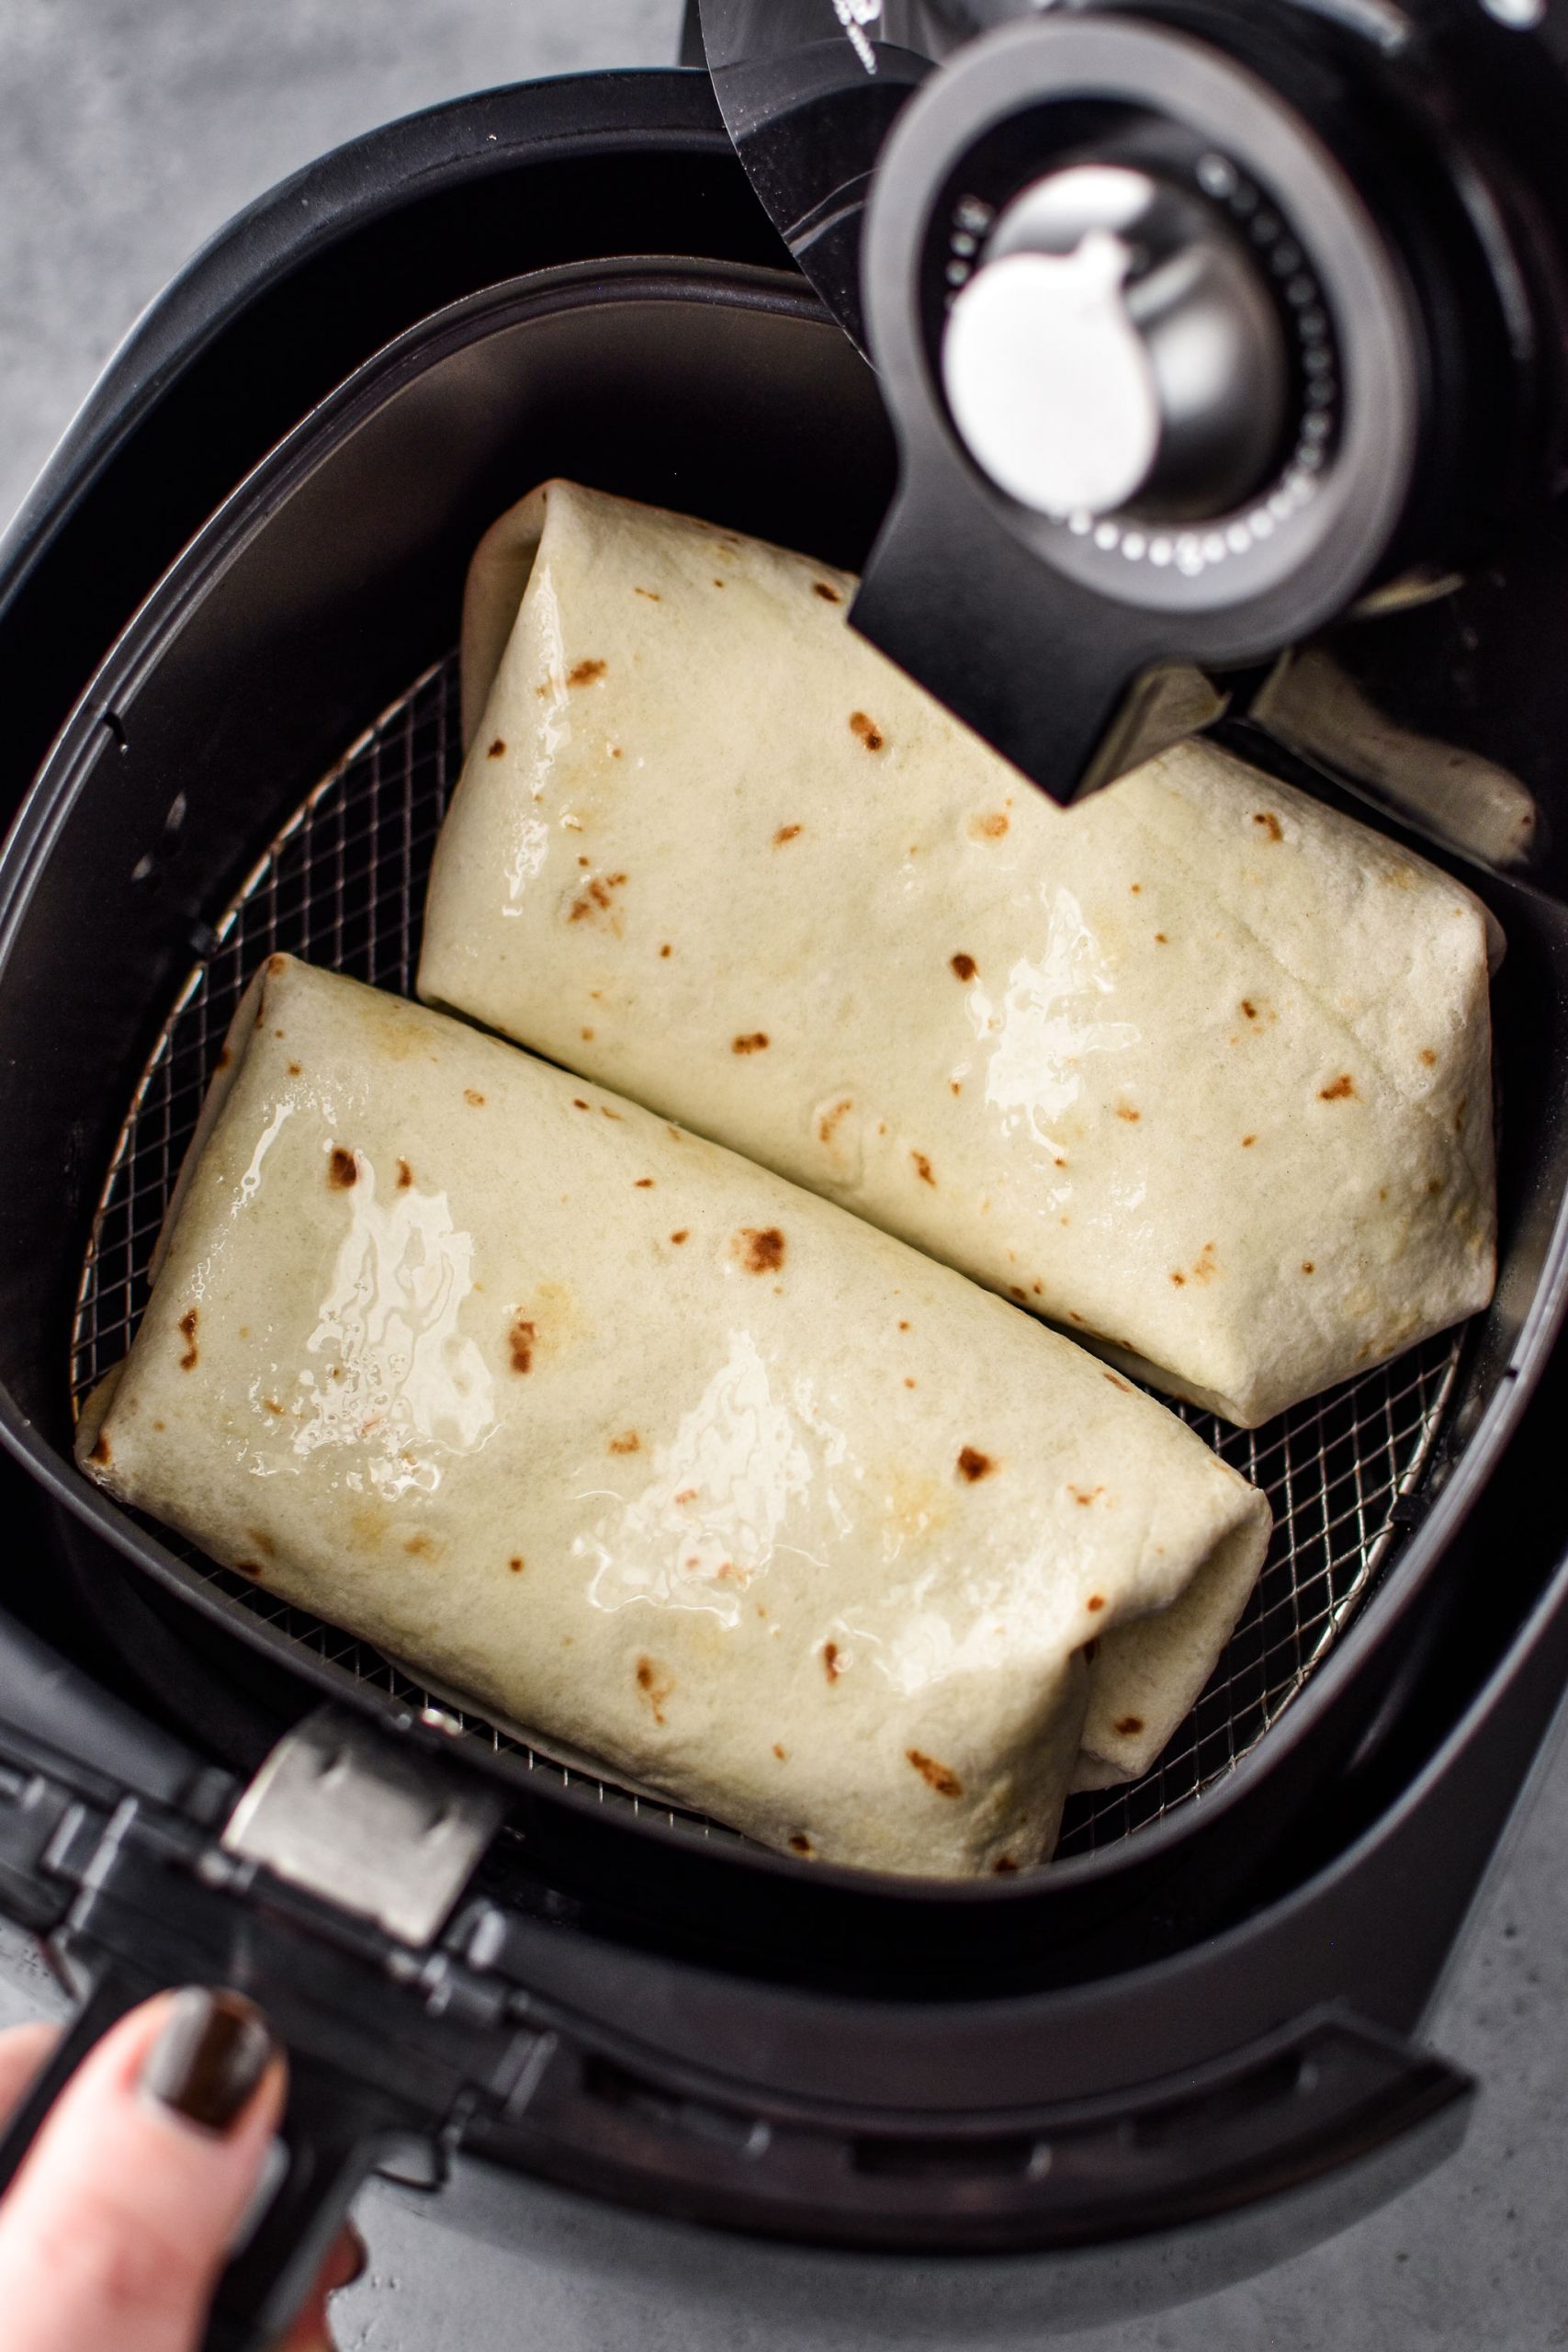 Frozen Burritos Air Fryer
 How to Make Chimichangas in an Air Fryer Project Meal Plan